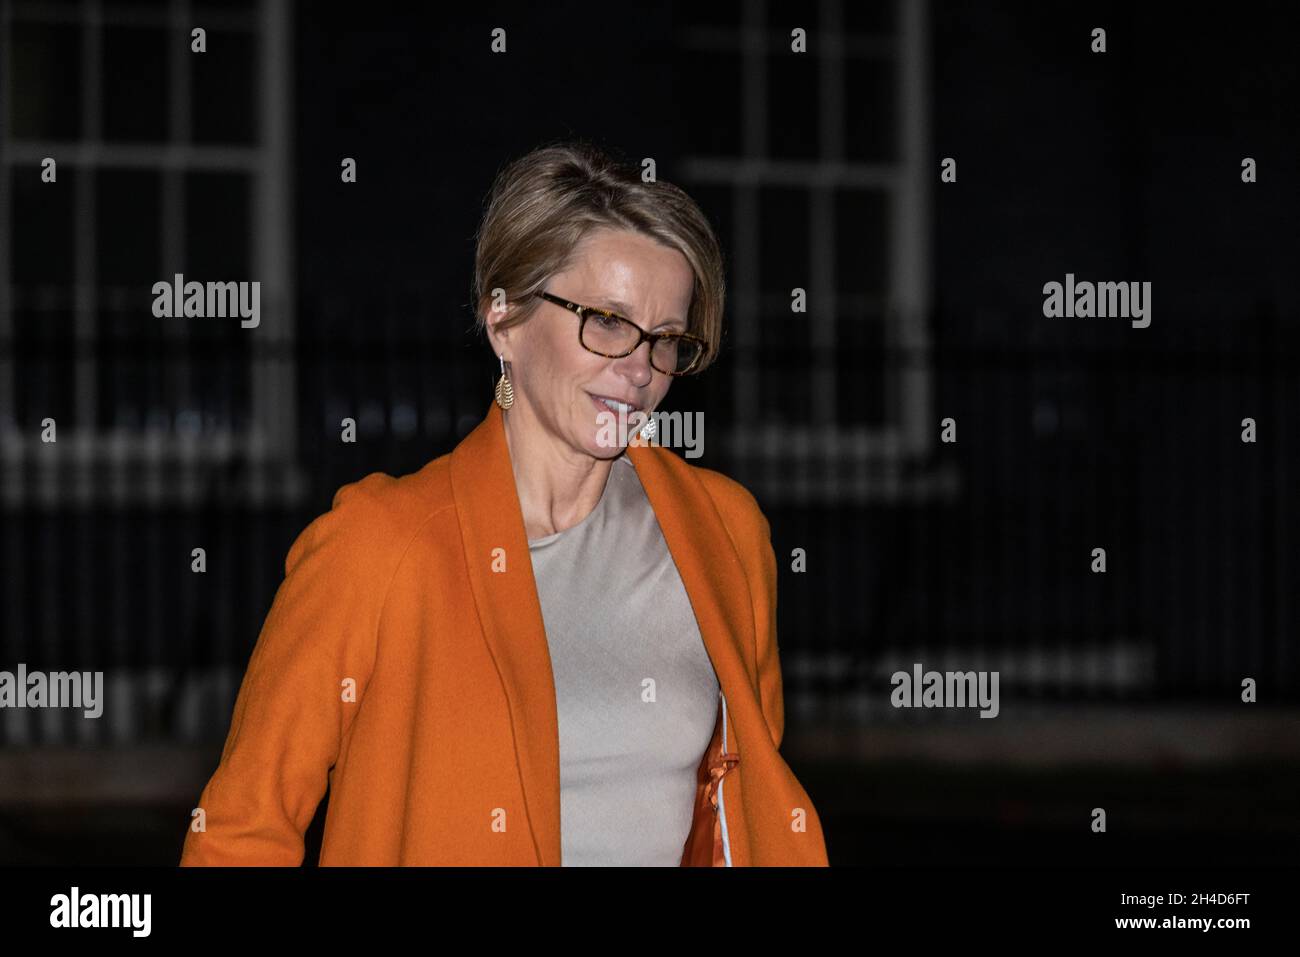 Prime Minister invites world’s business leaders including Emma Walmsley CEO of GlaxoSmithKline to 10 Downing Street to establish 'Global Britain'. Stock Photo